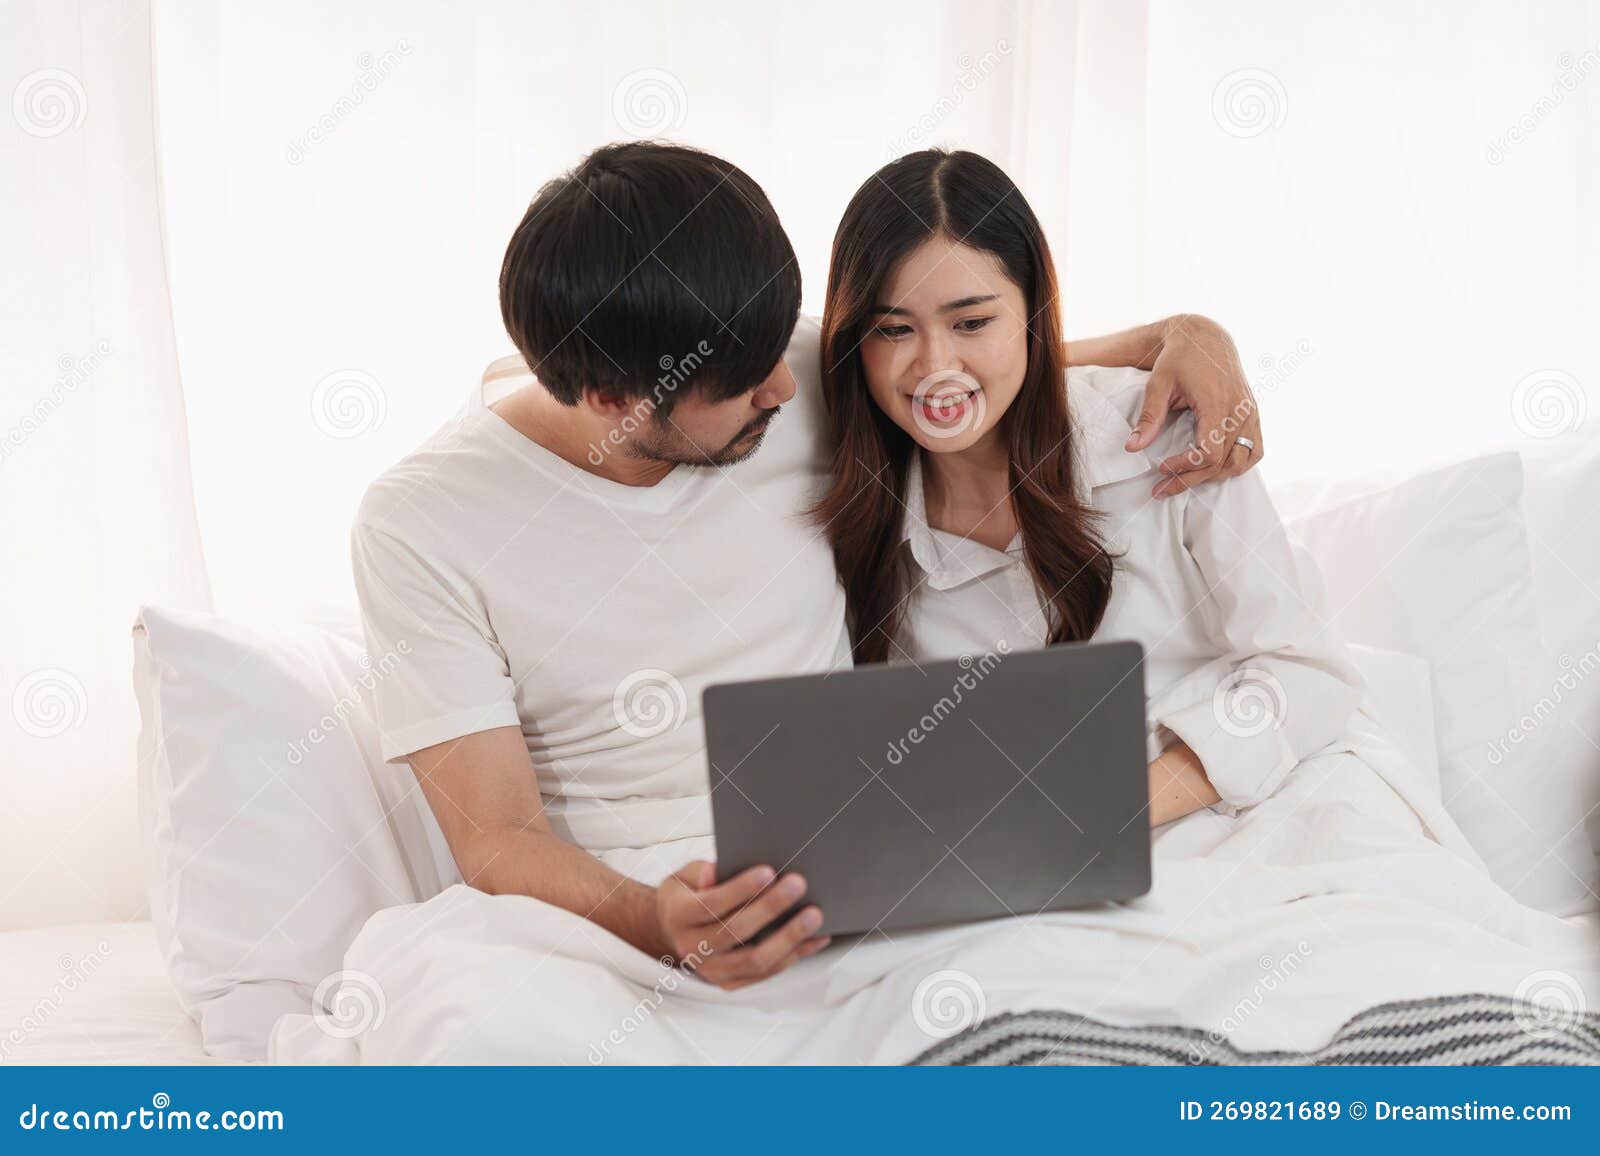 Beautiful Asian Couple In Love And Smiling Sitting On Bed Romantic Moment Relationships